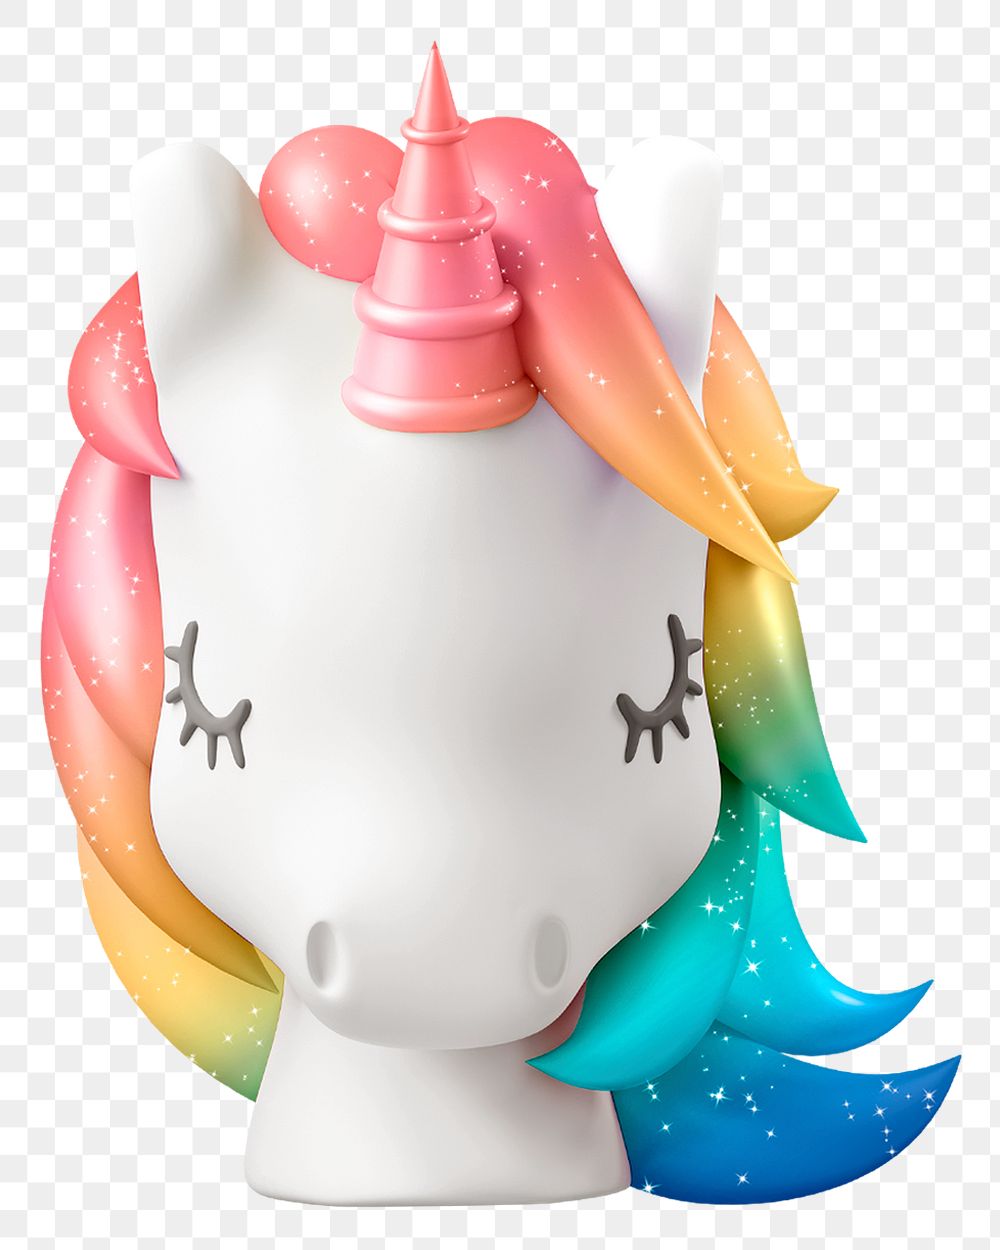 3D unicorn head png sticker, startup business on transparent background